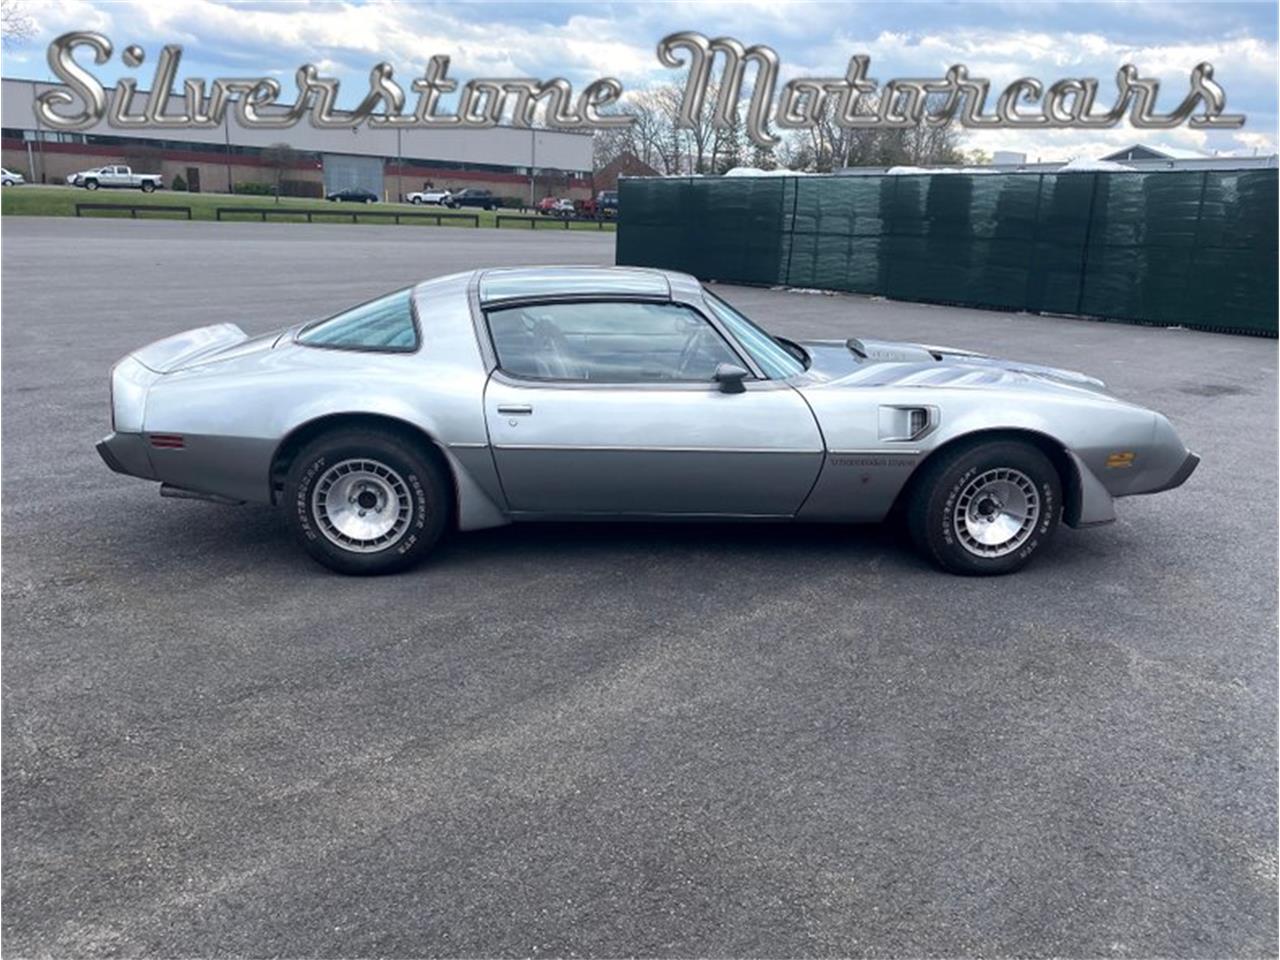 1979 Pontiac Firebird Trans Am for sale in North Andover, MA